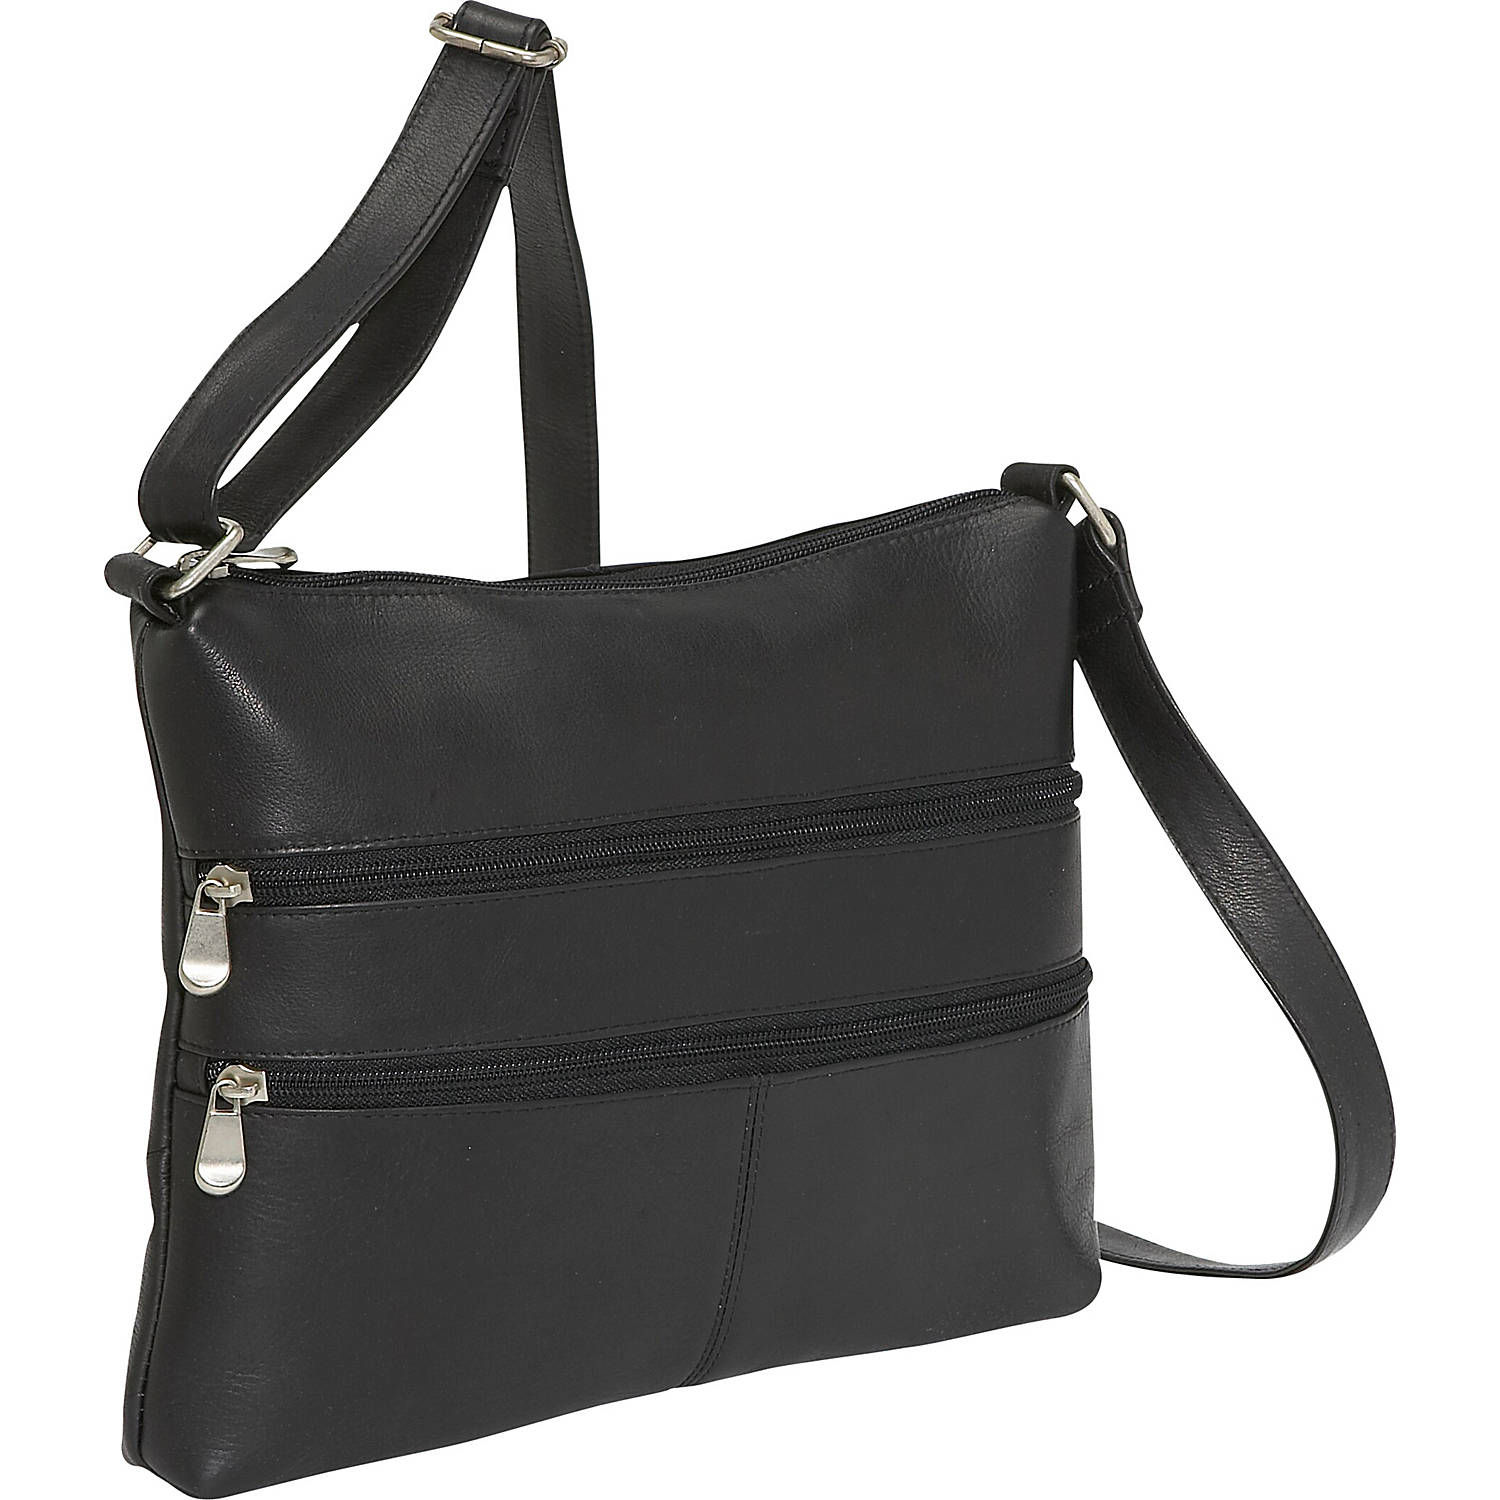 Two-Zip Leather Crossbody Bag - Le Donne Leather